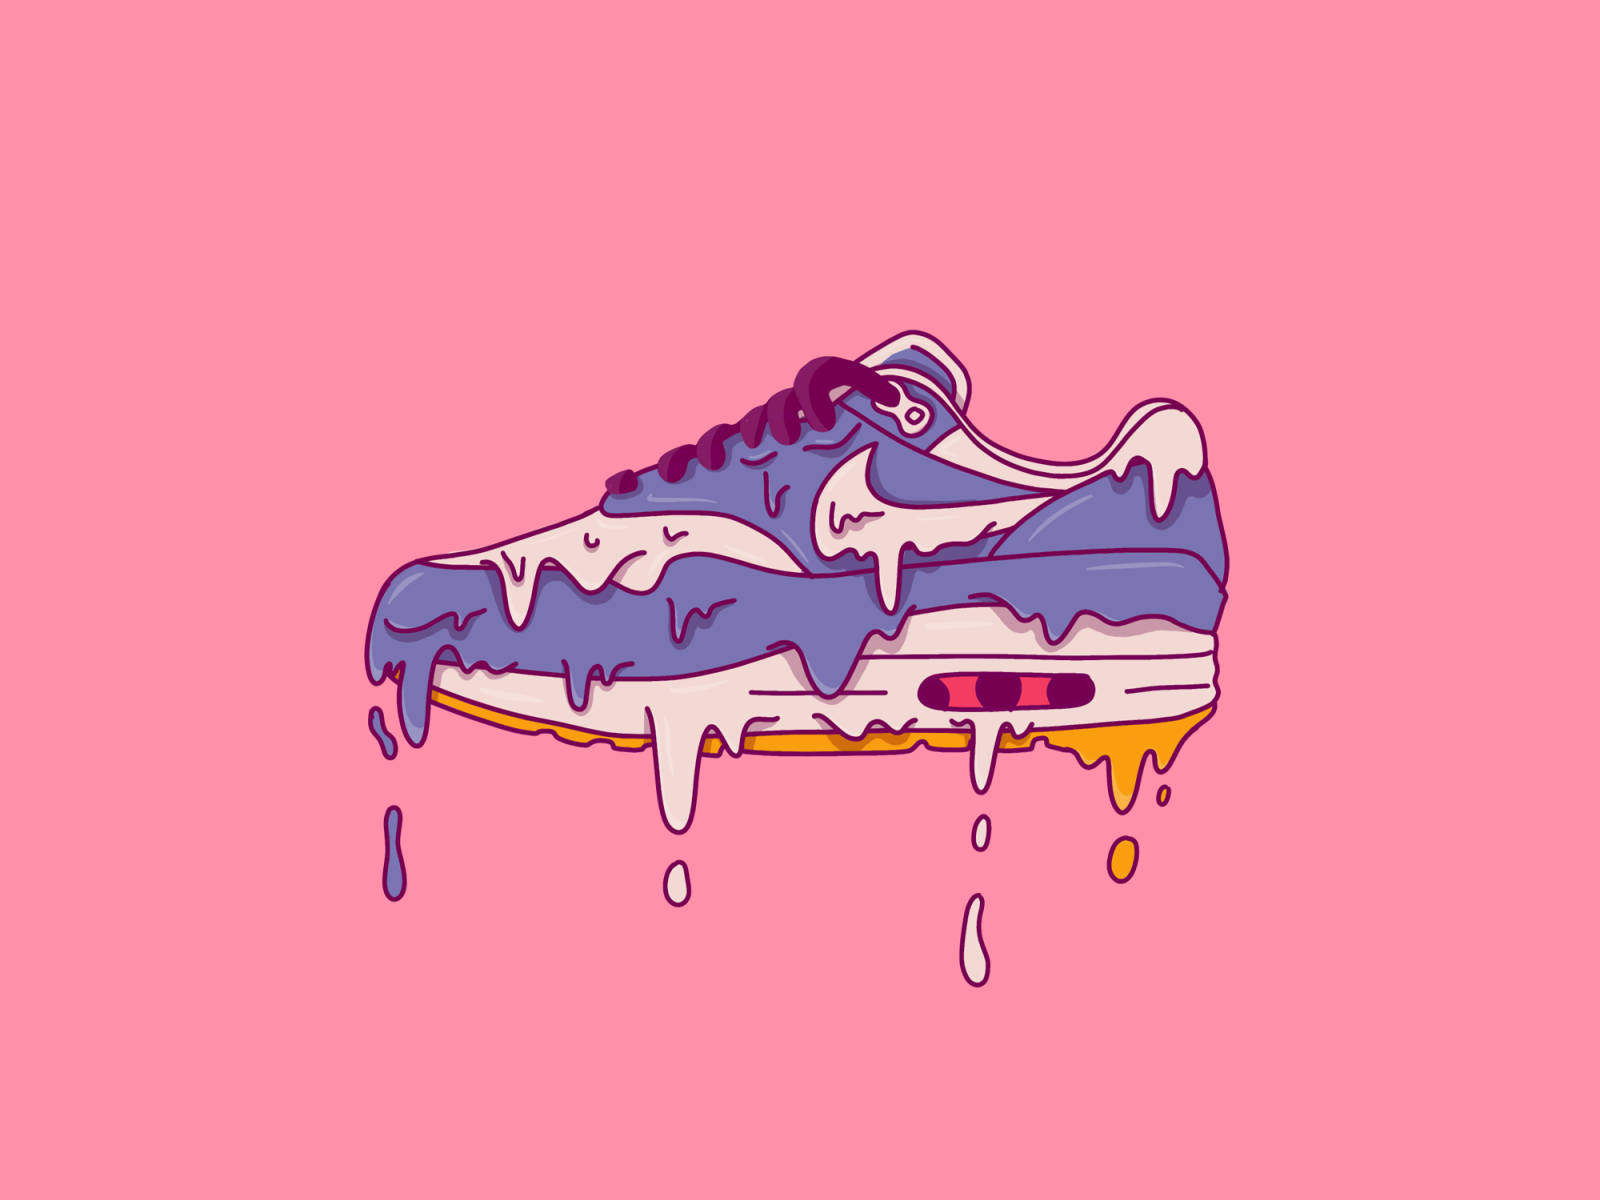 Cool Drip Melting Sneaker Background